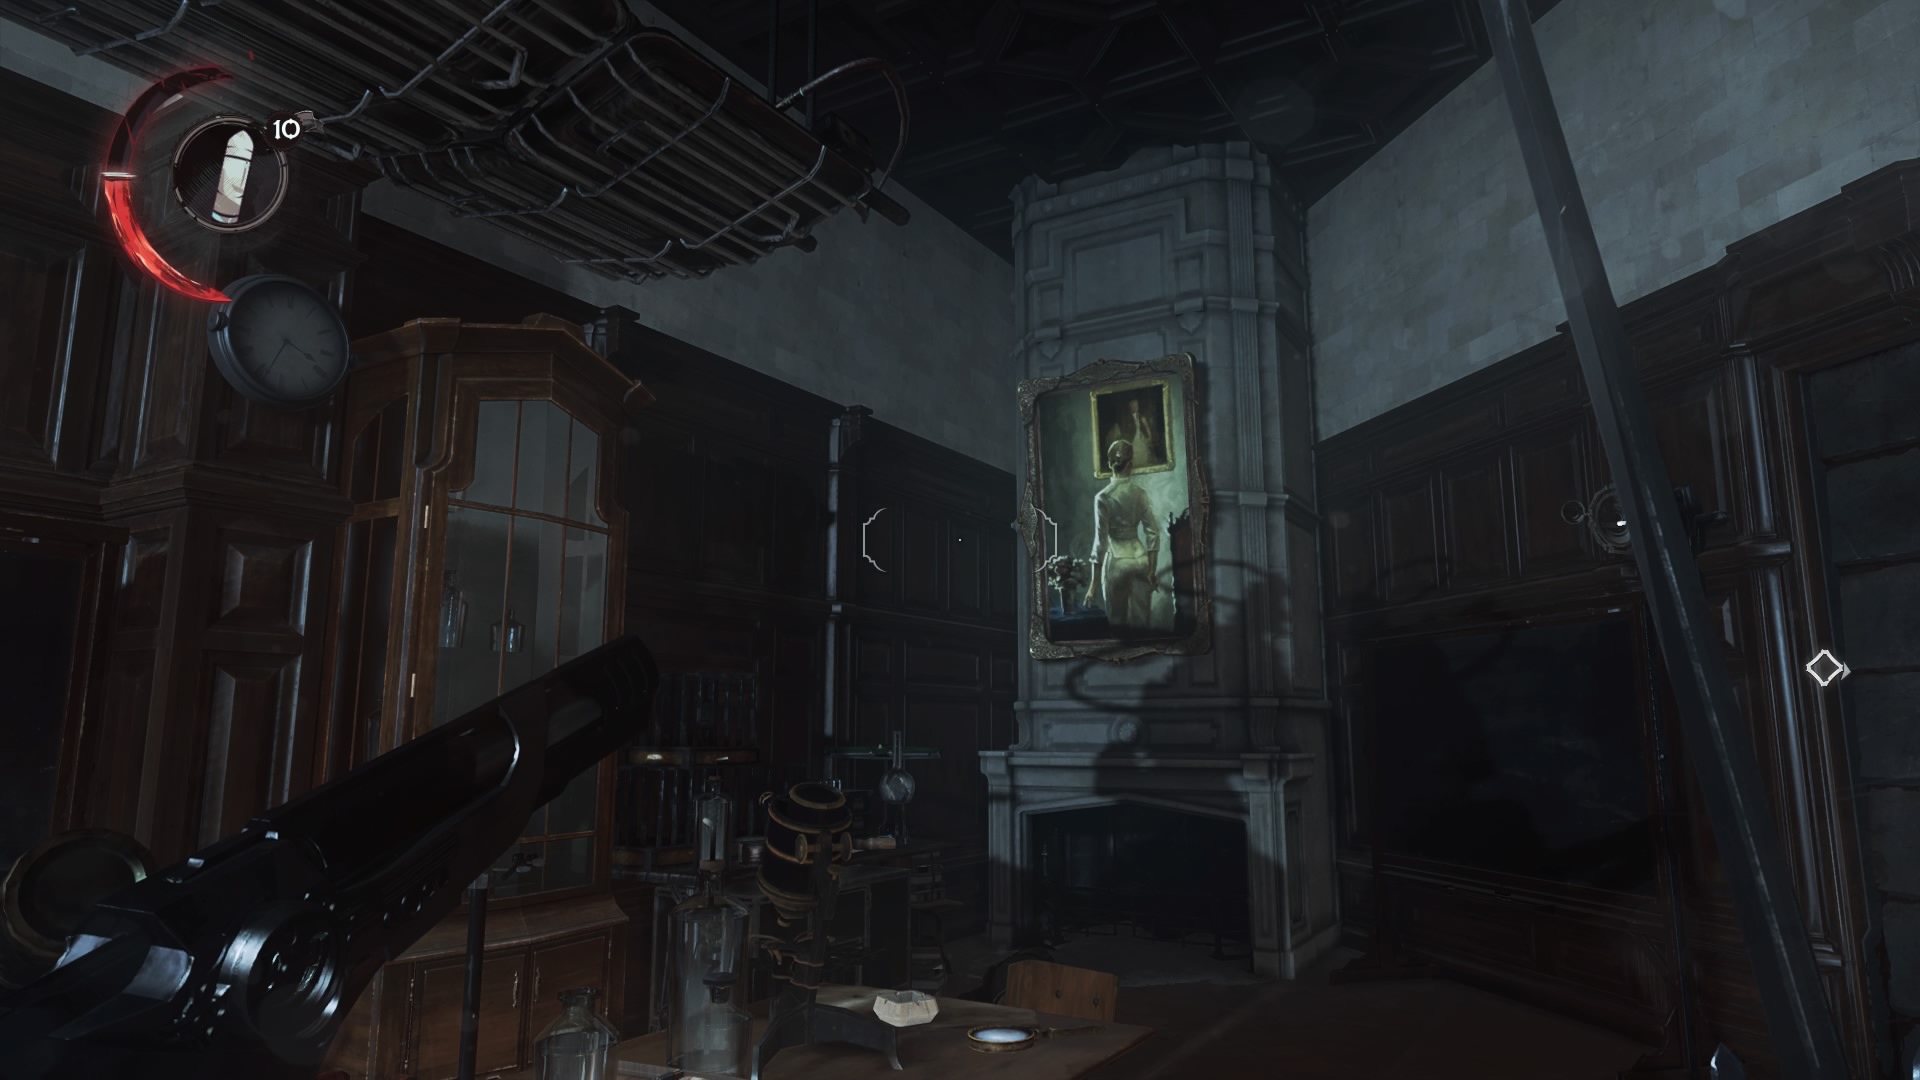 Dishonored 2: Painting Locations - , The Video Games Wiki